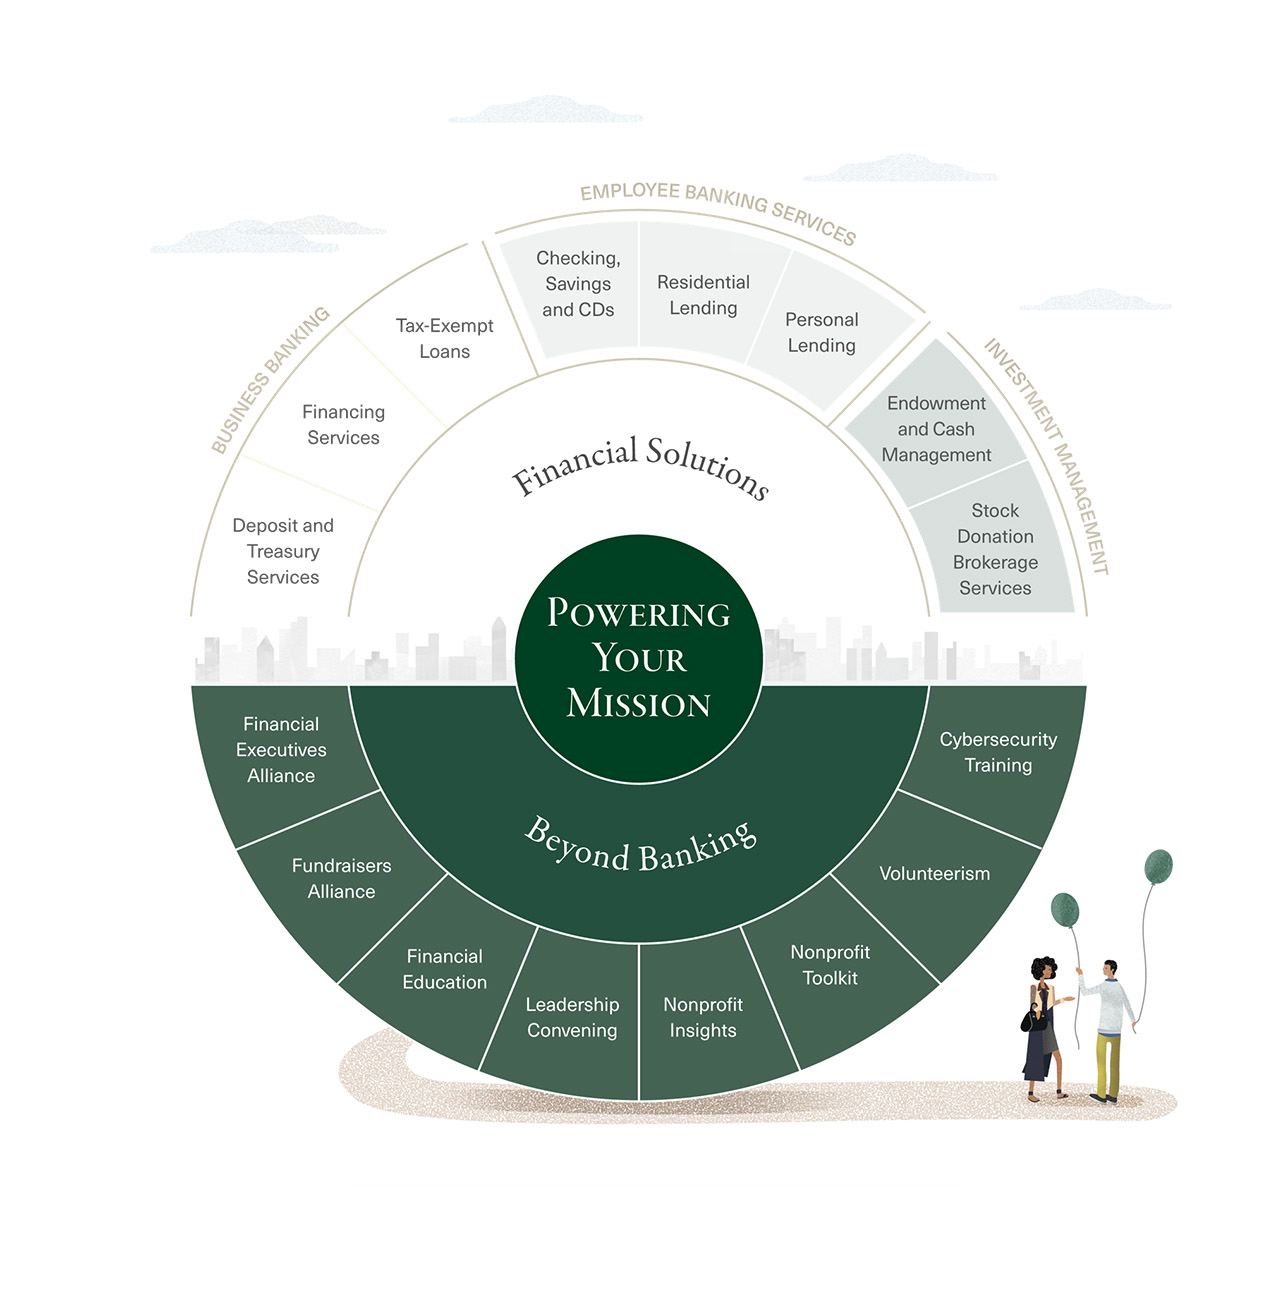 First Republic Product and Services Wheel Graphic